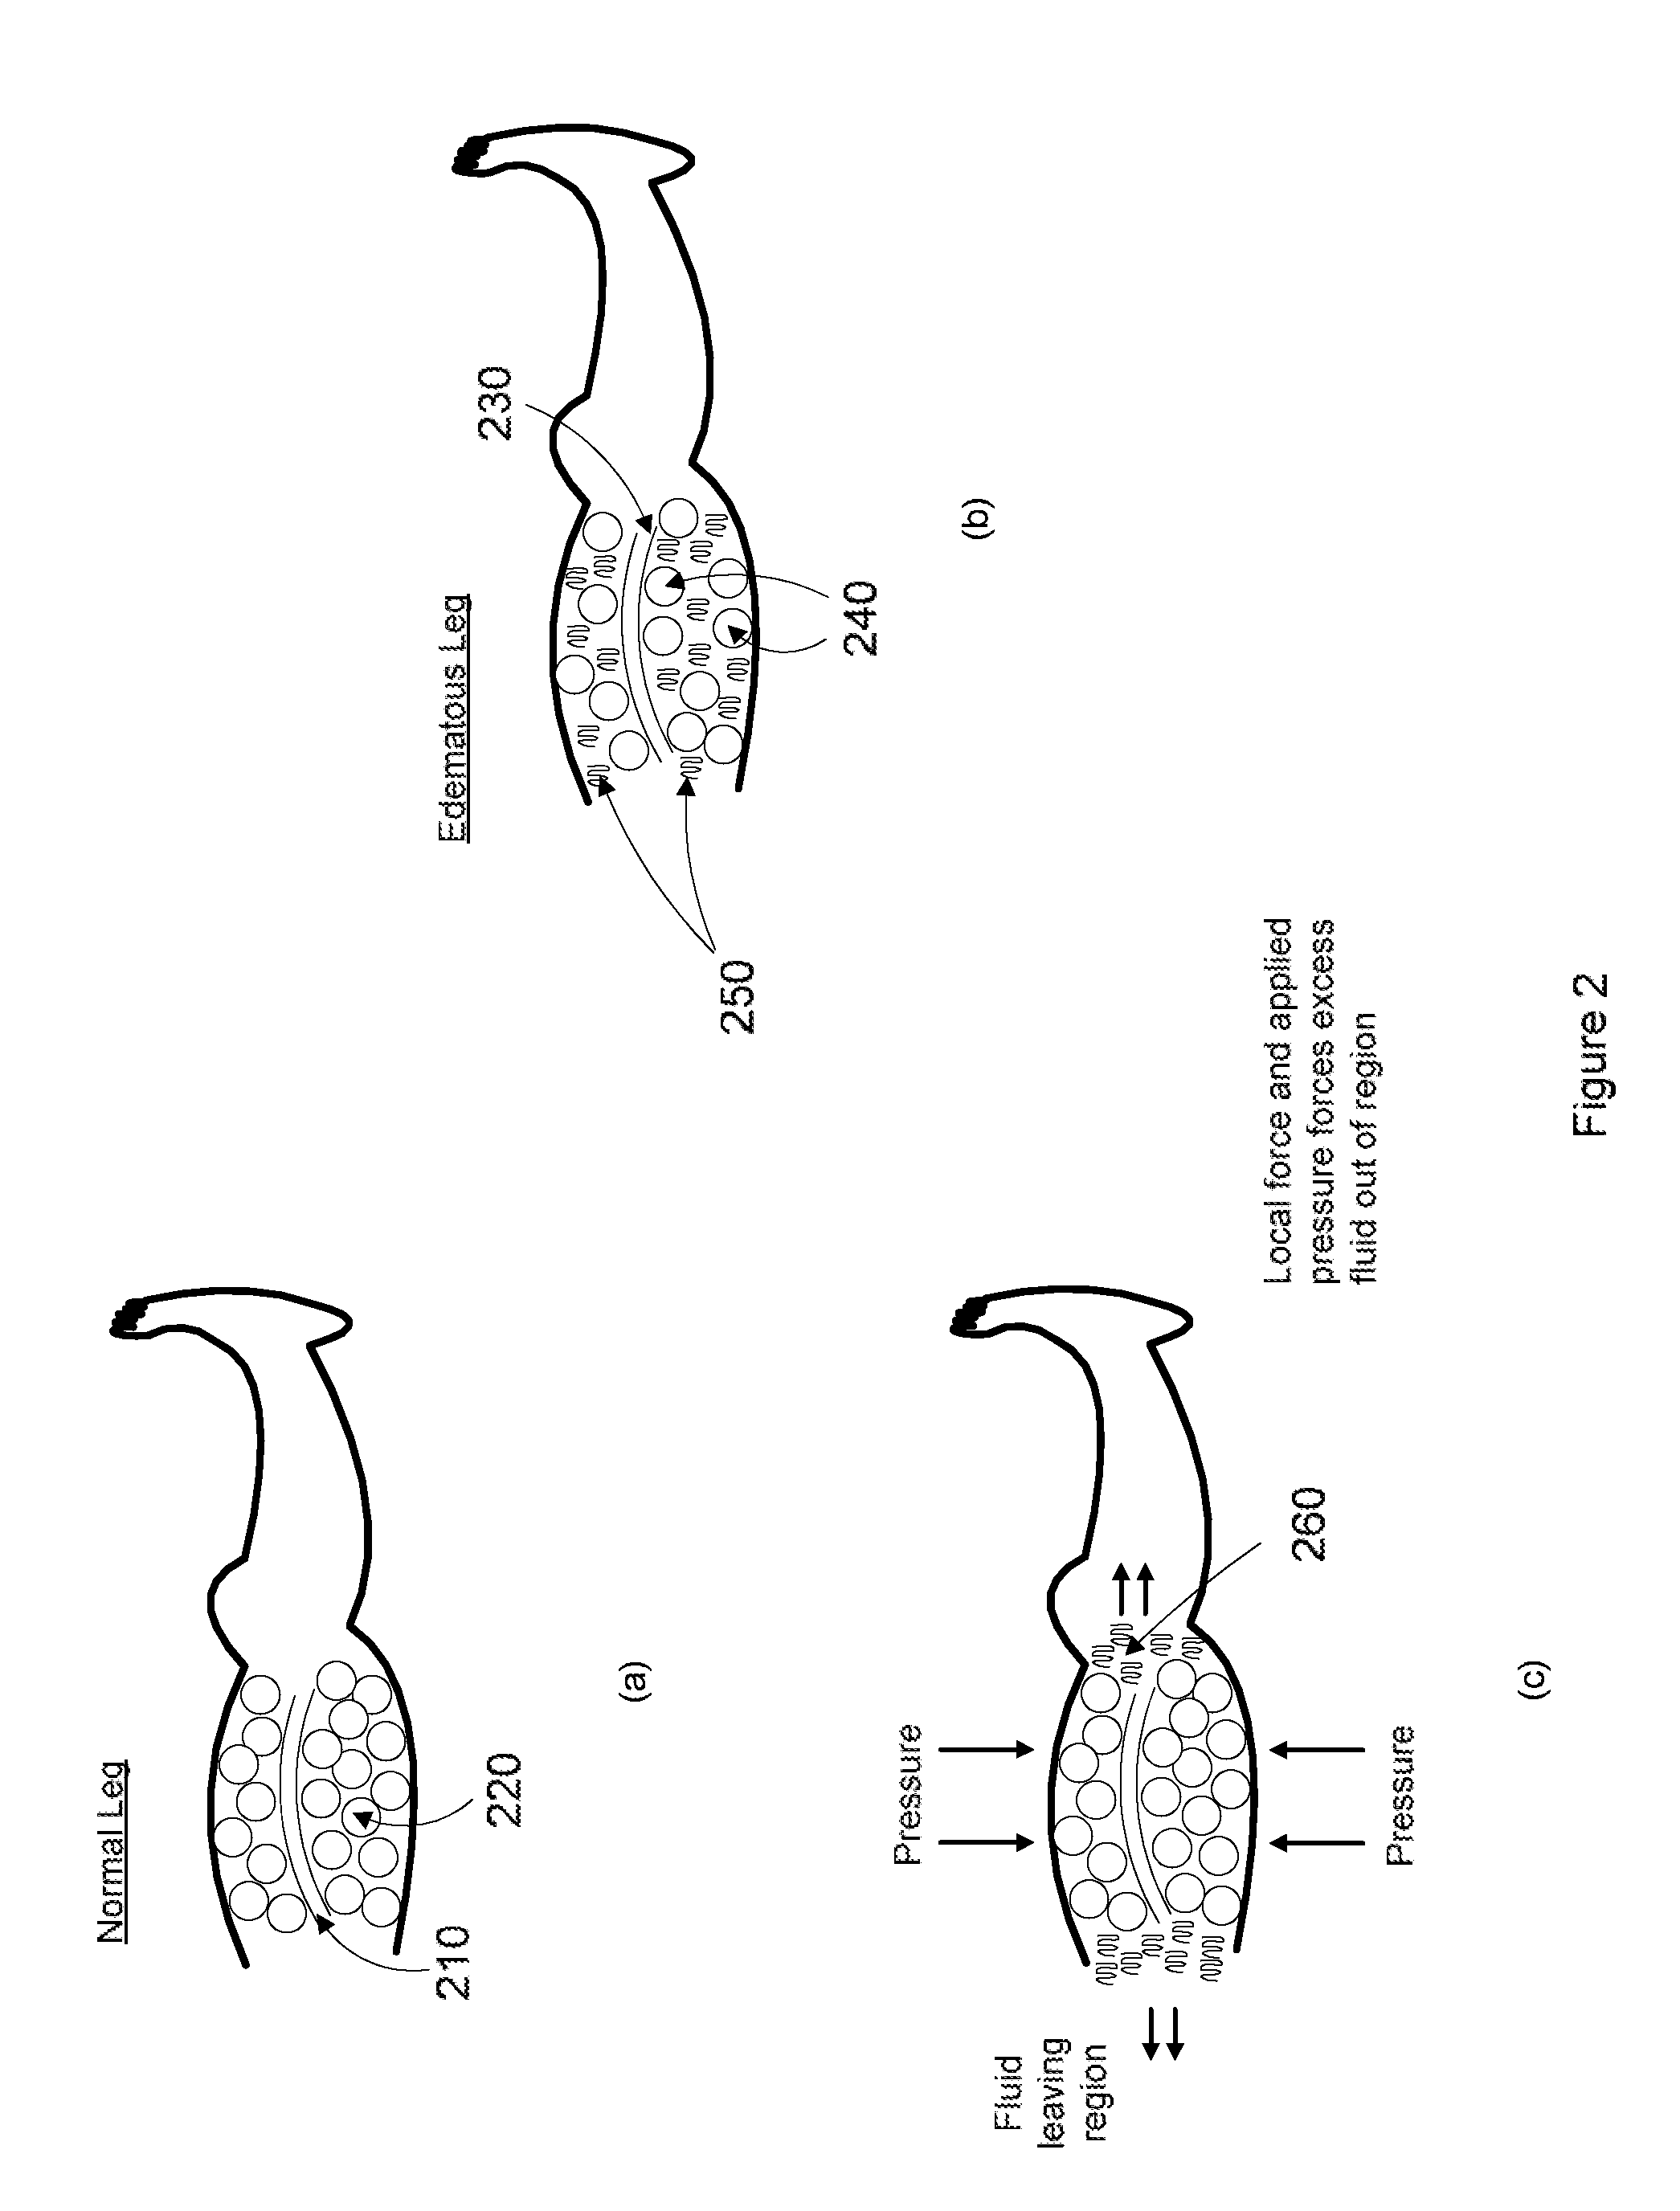 Device, system, and method to improve powered muscle stimulation performance in the presence of tissue edema